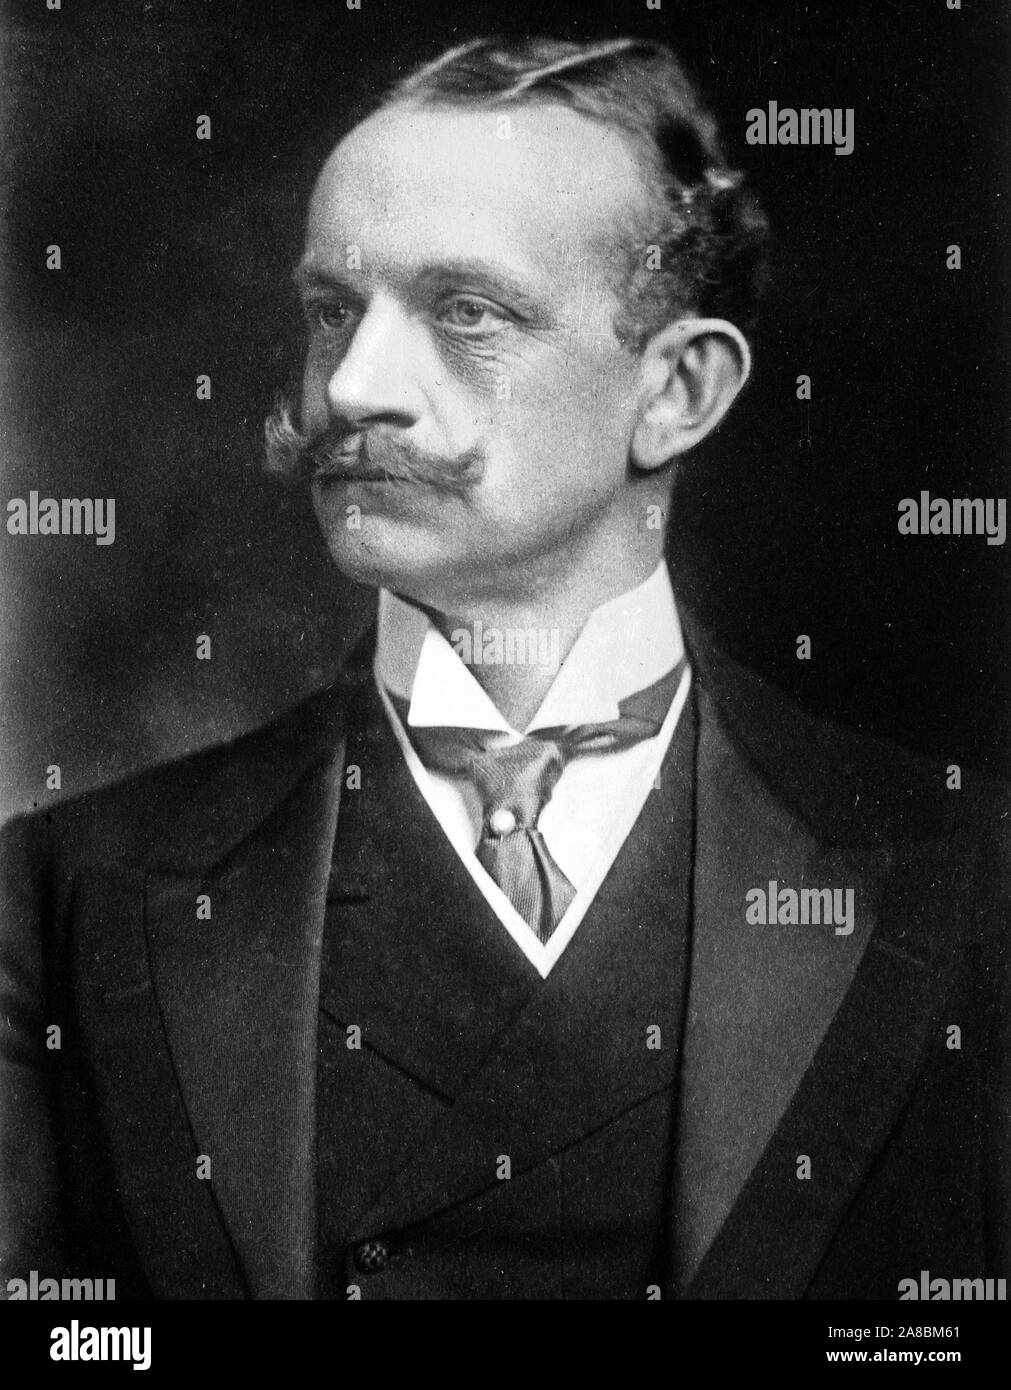 Count von Bernstorff, portr. Dec 1908, one of the men Hitler personally blamed for the collapse of Germany after the Great War. Stock Photo